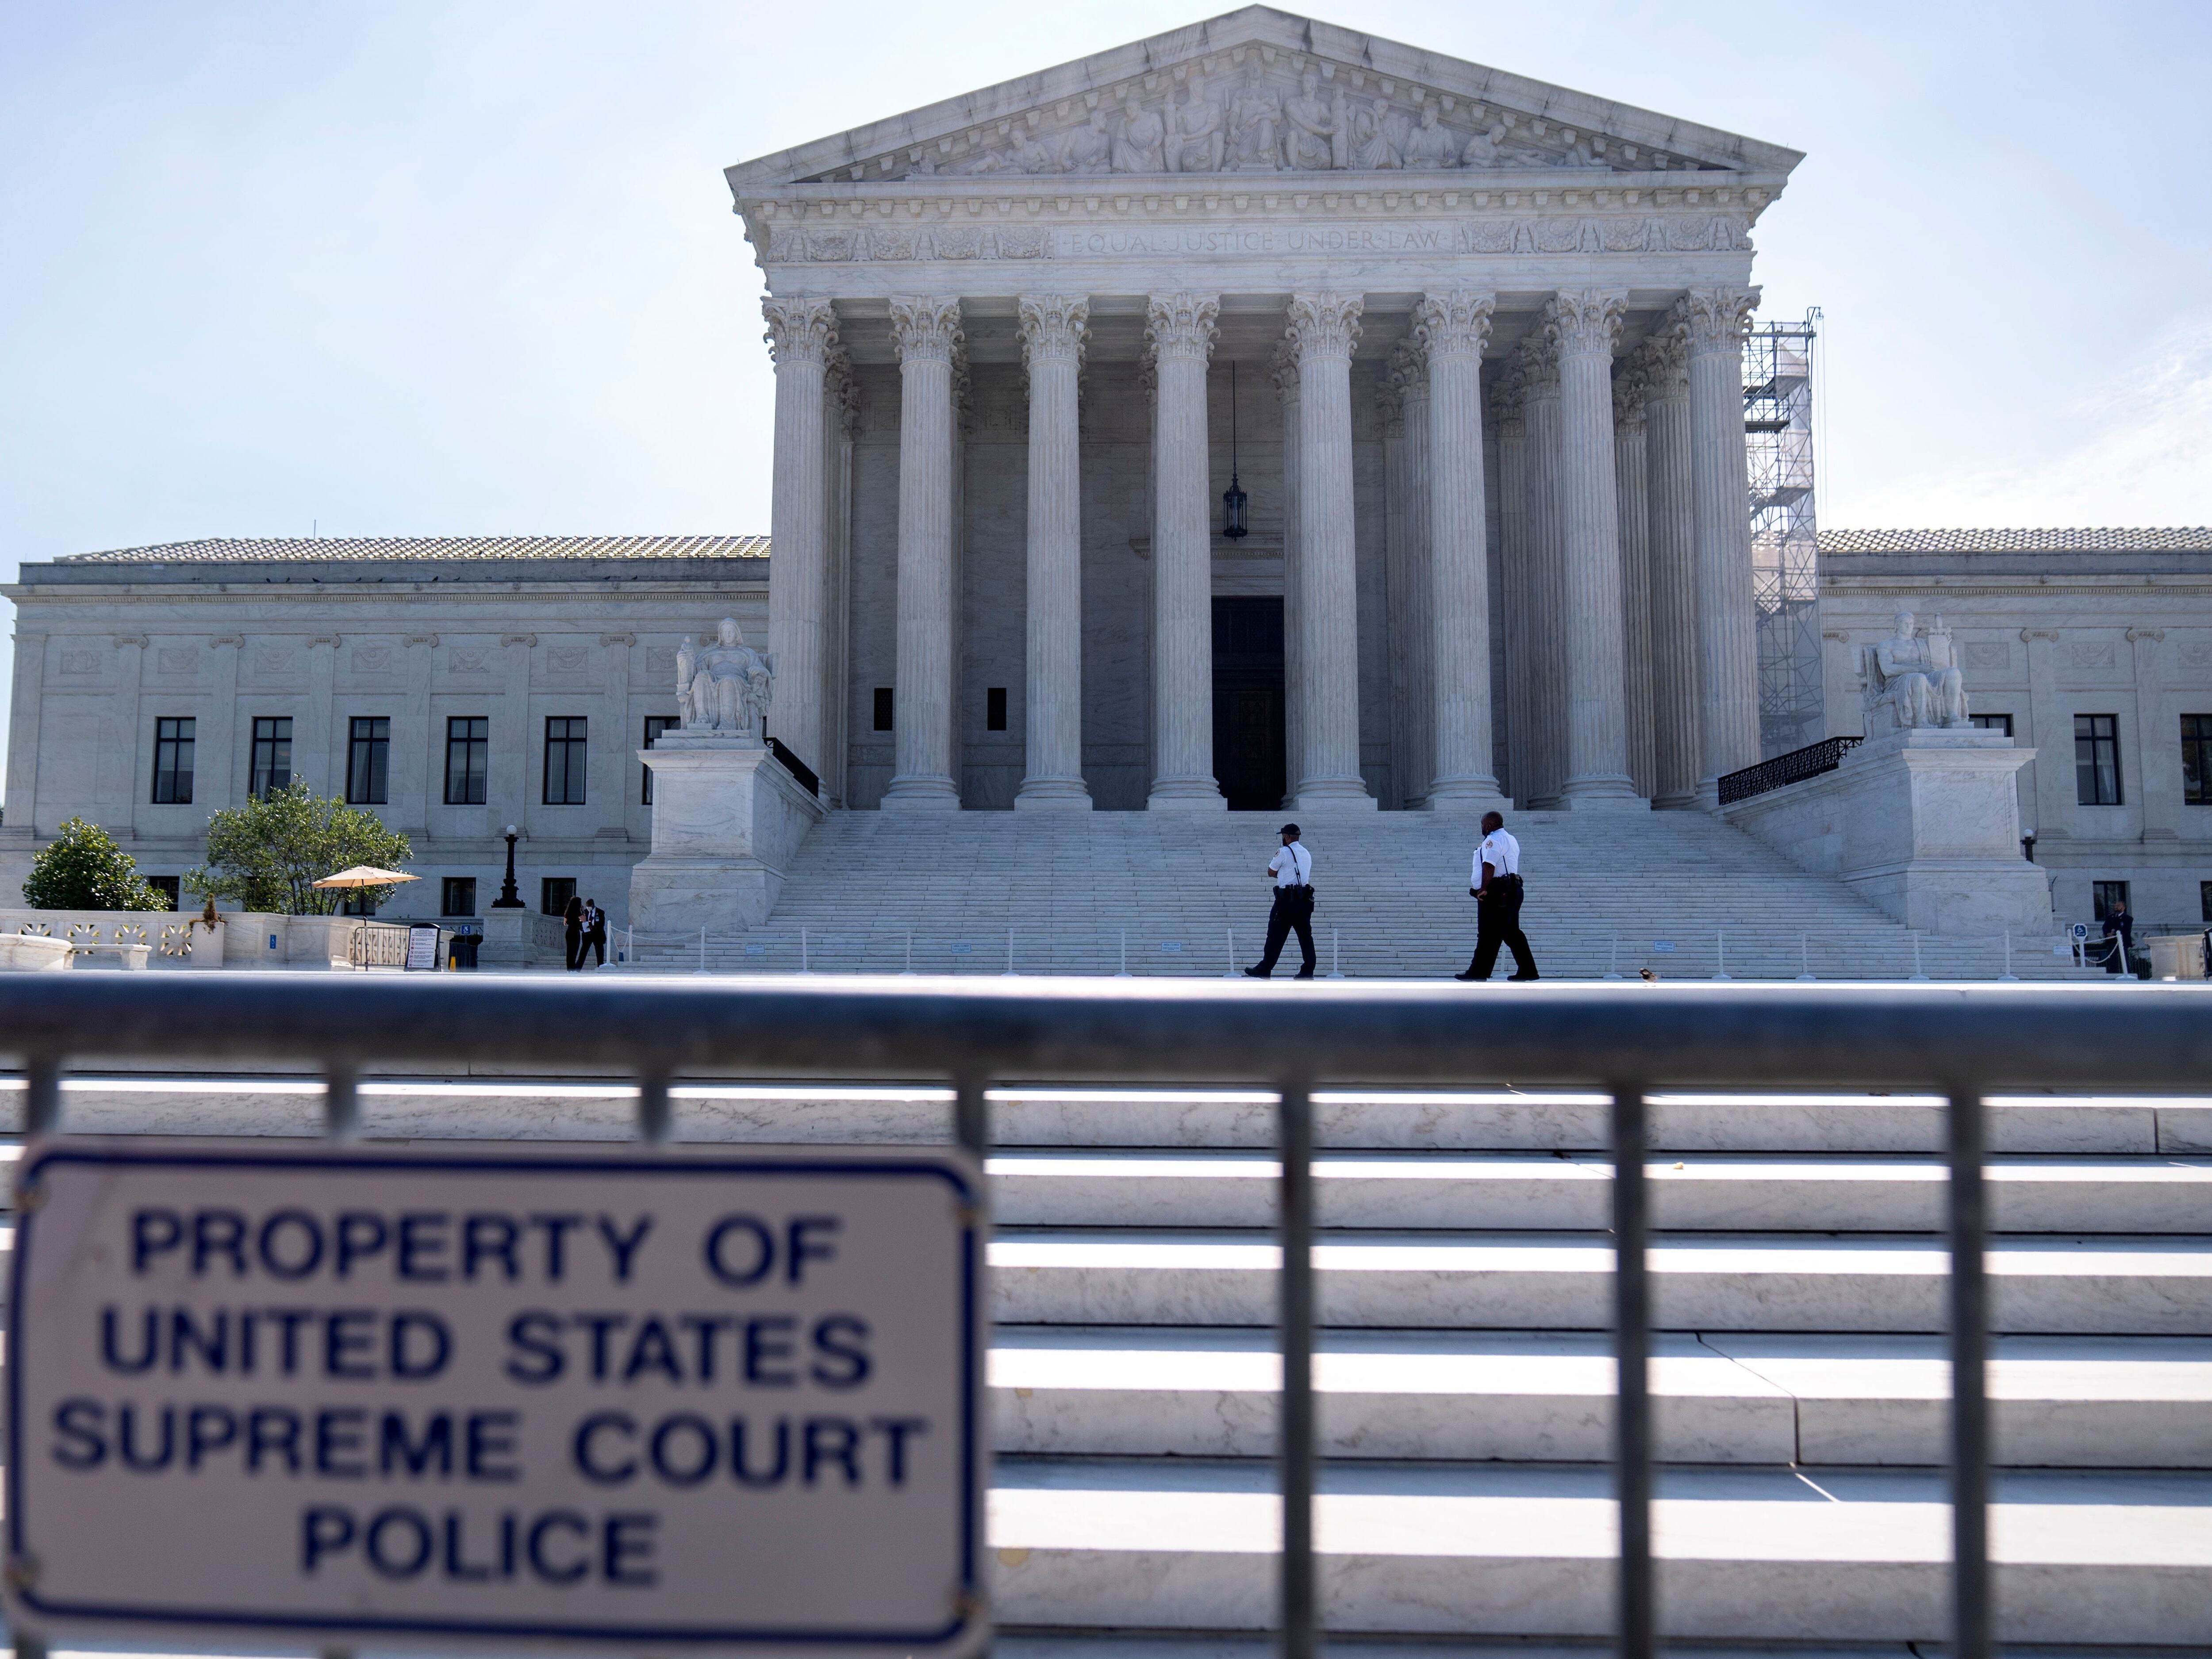 What is left for the US Supreme Court to decide?